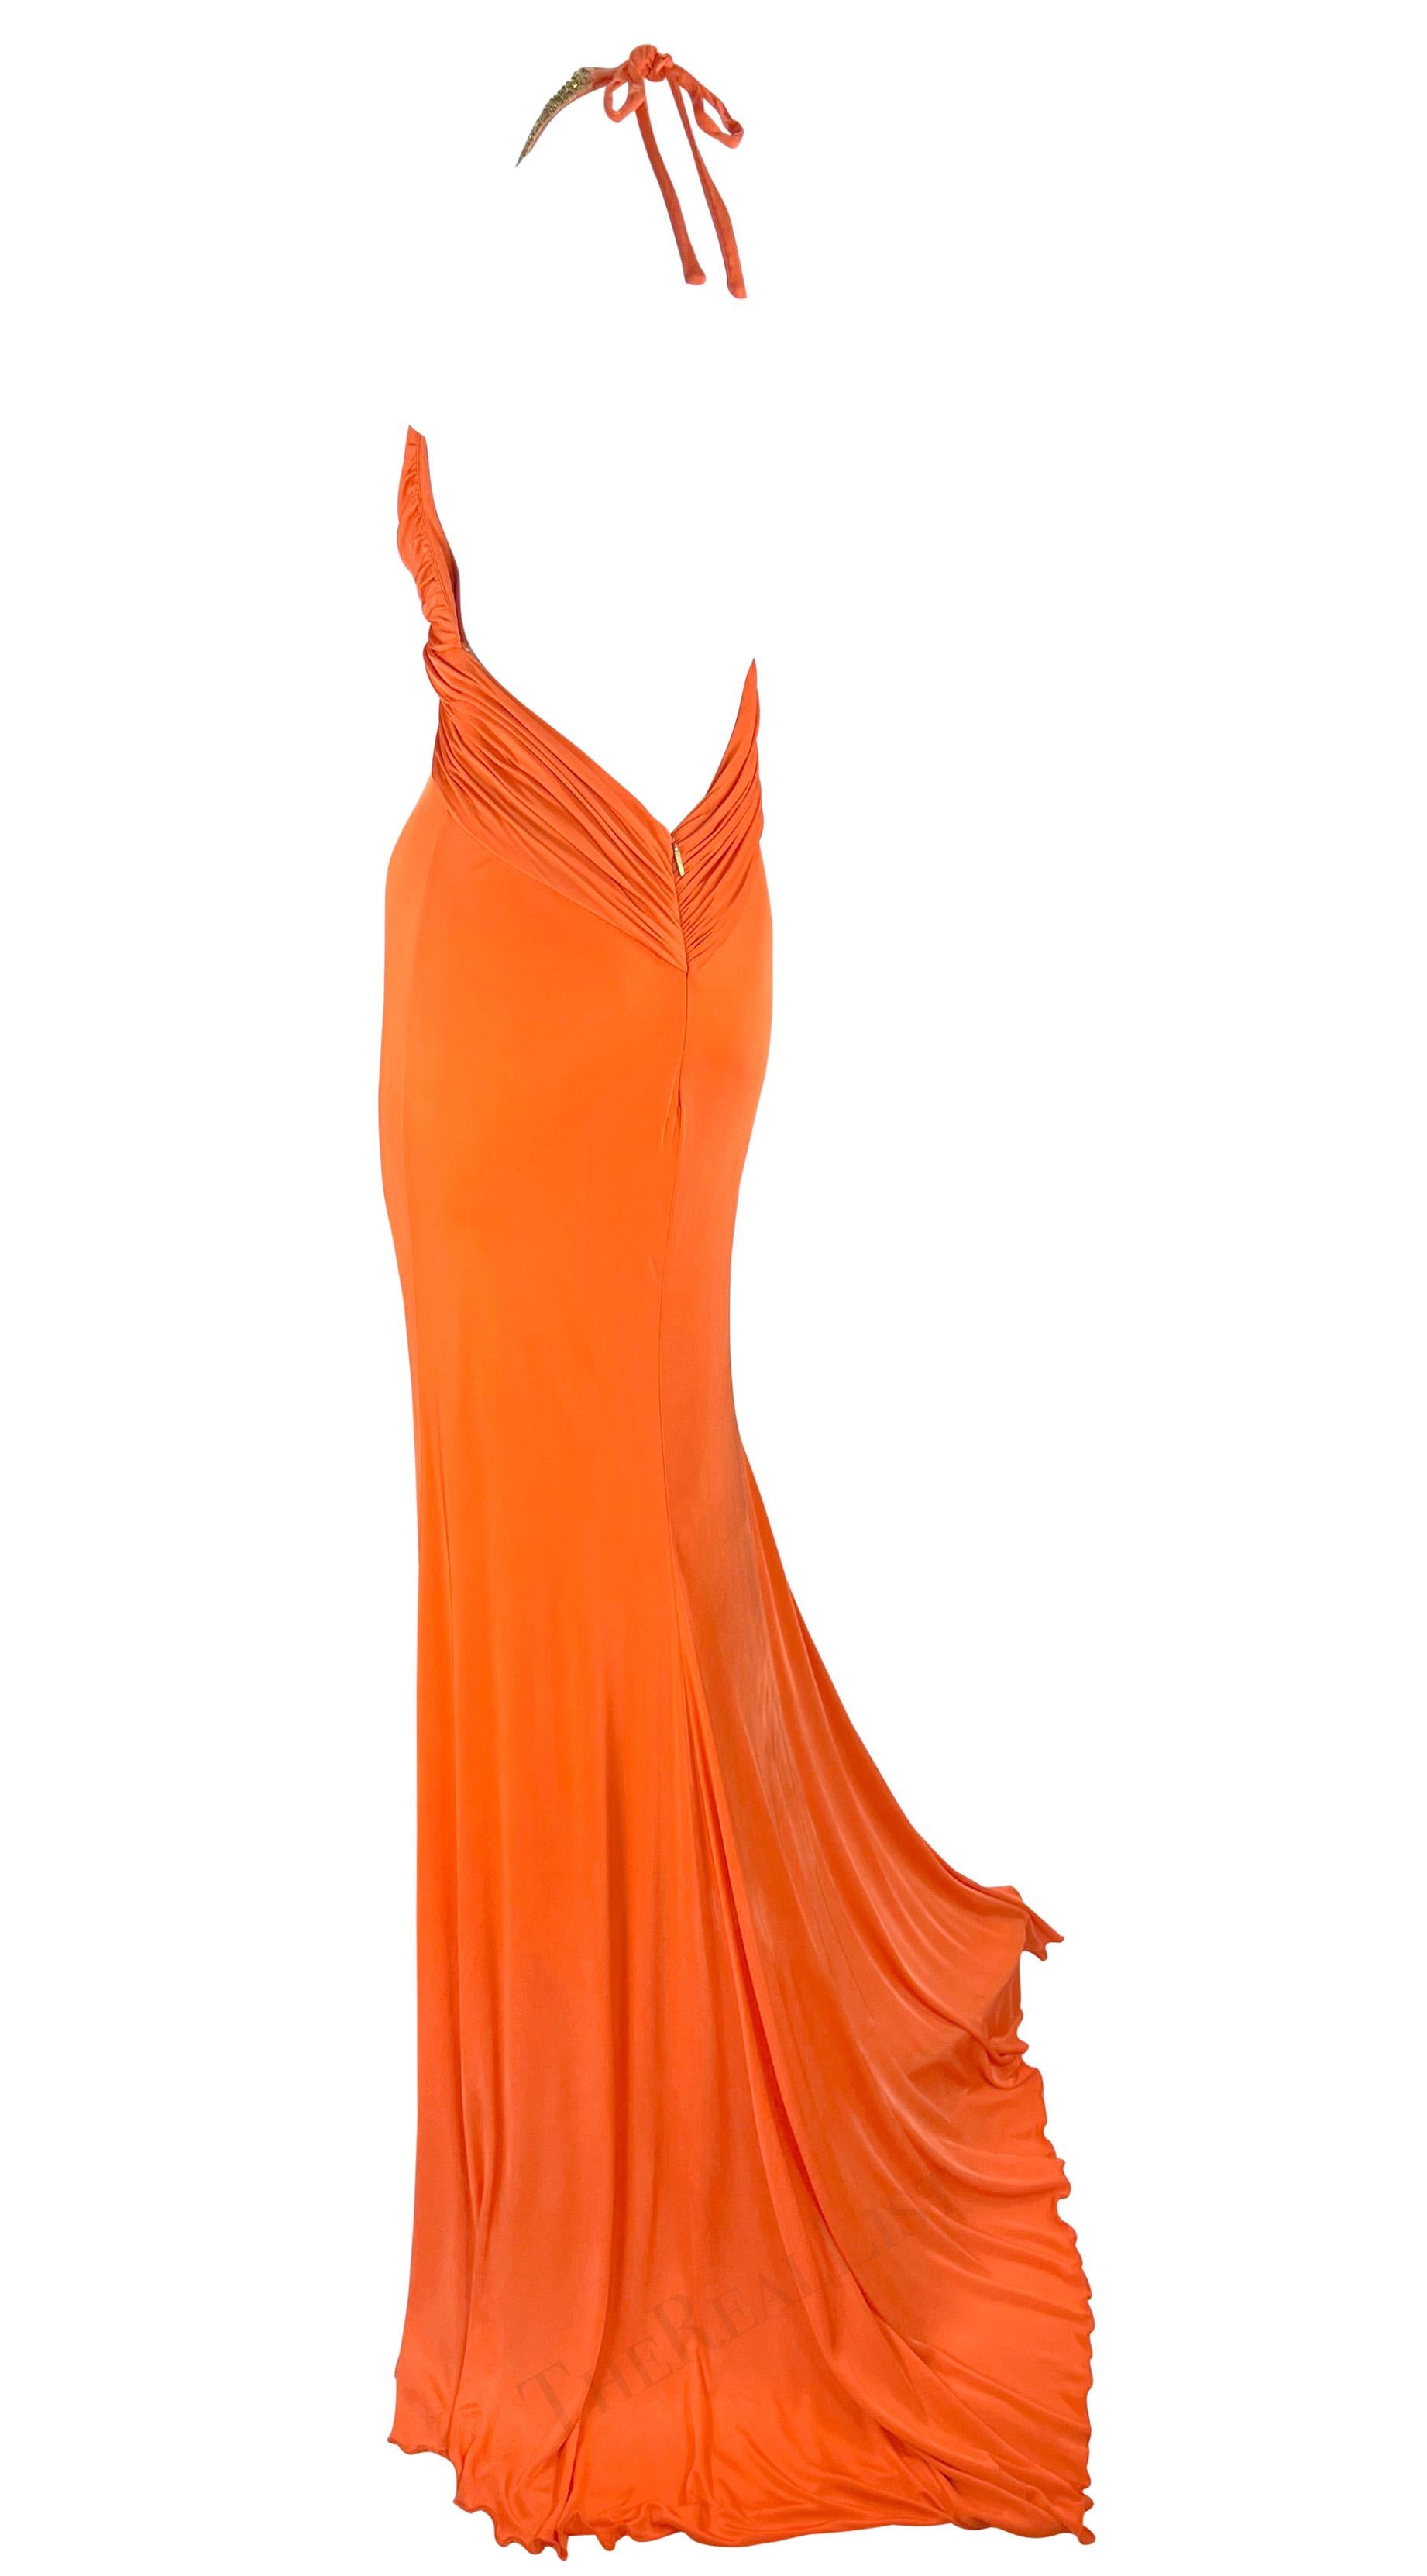 S/S 2005 Roberto Cavalli Backless Orange Bodycon Gold Sequin Plunging Gown For Sale 2